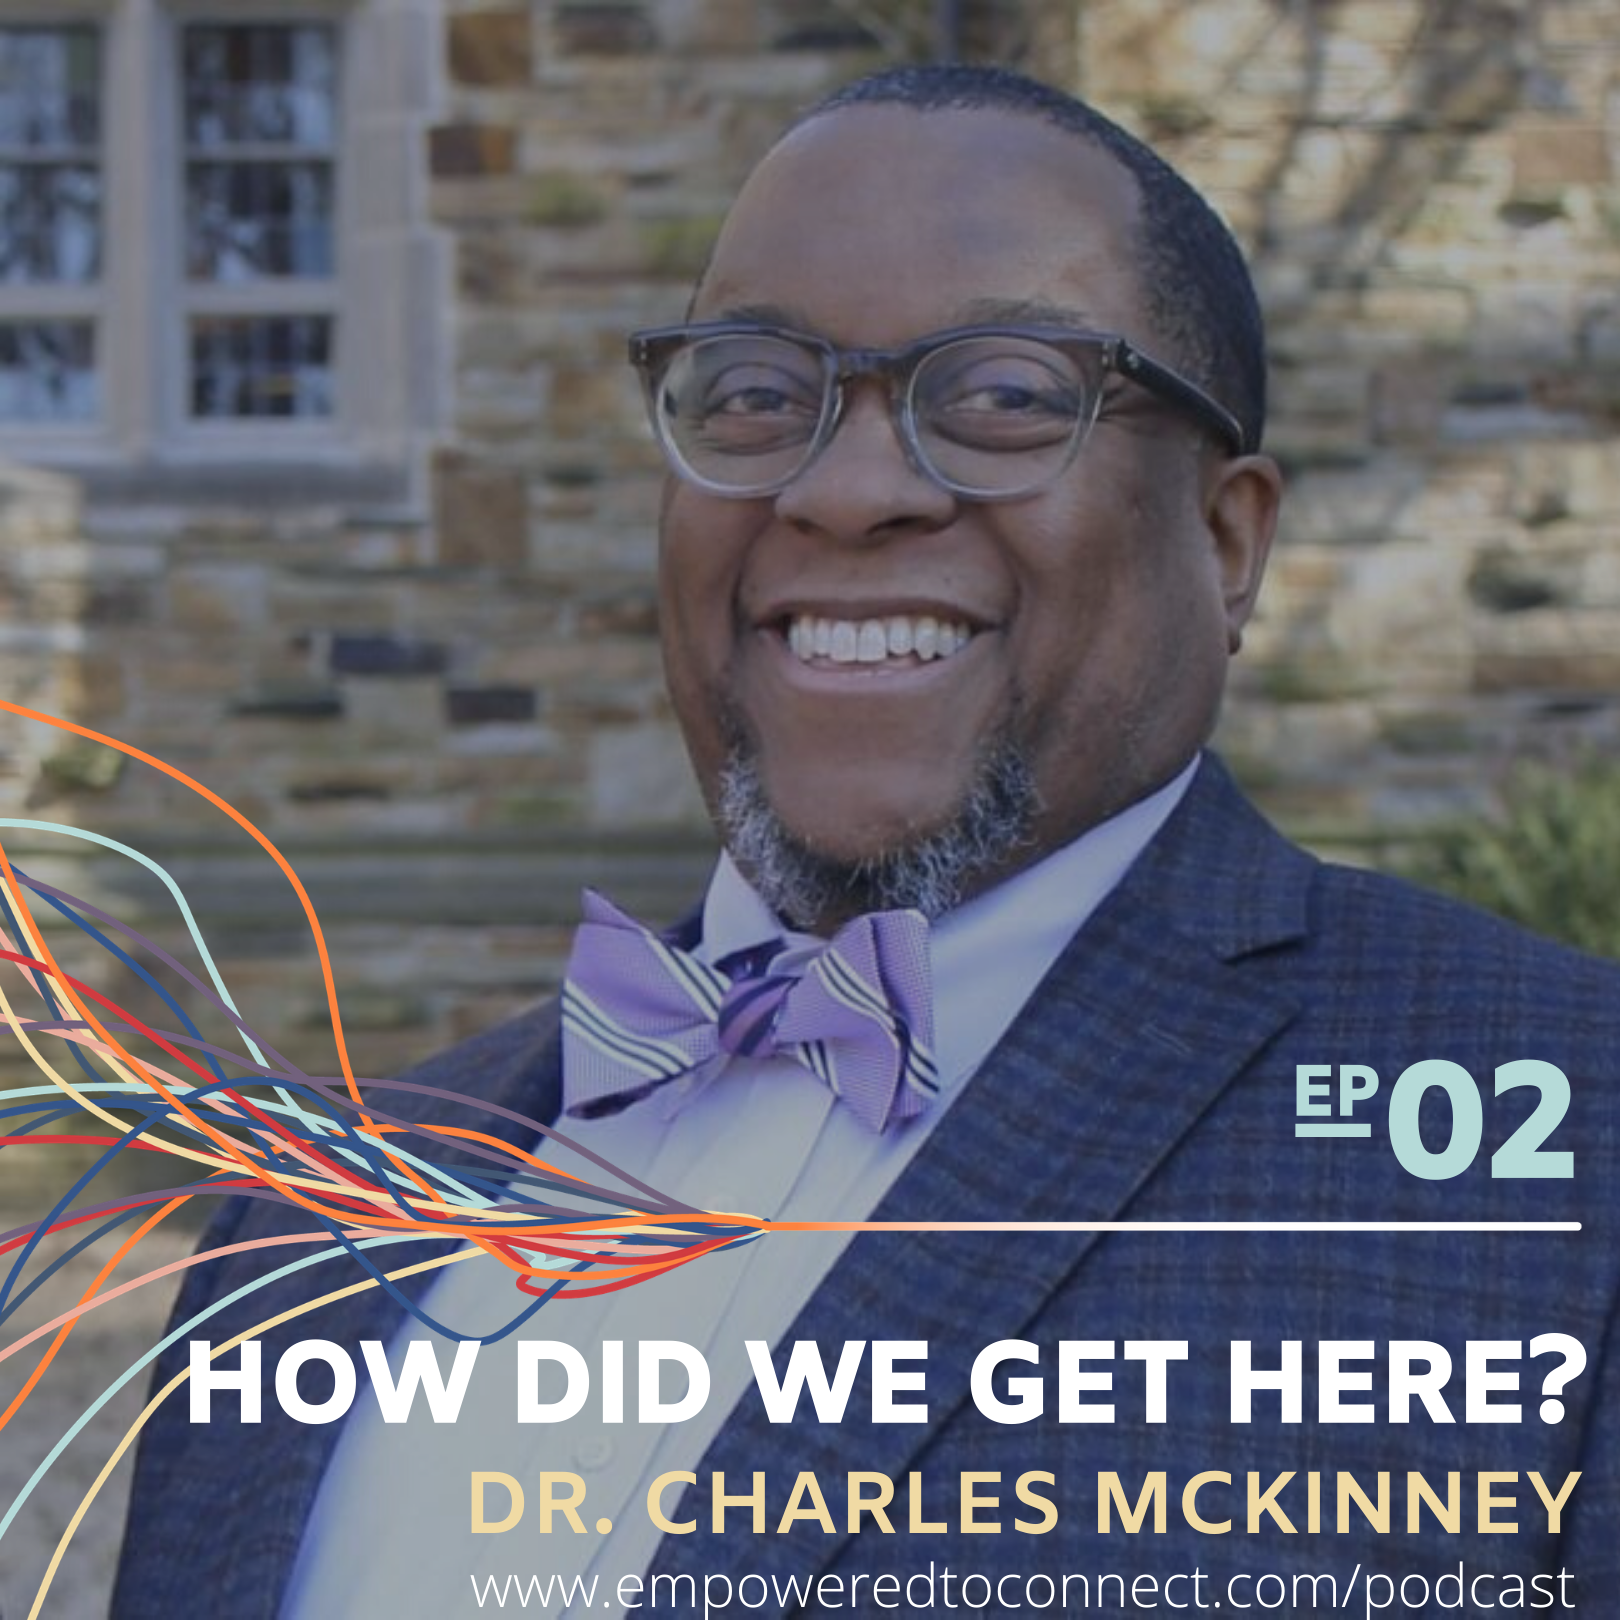 [E2] How did we get here? America's racial history with Dr. Charles McKinney